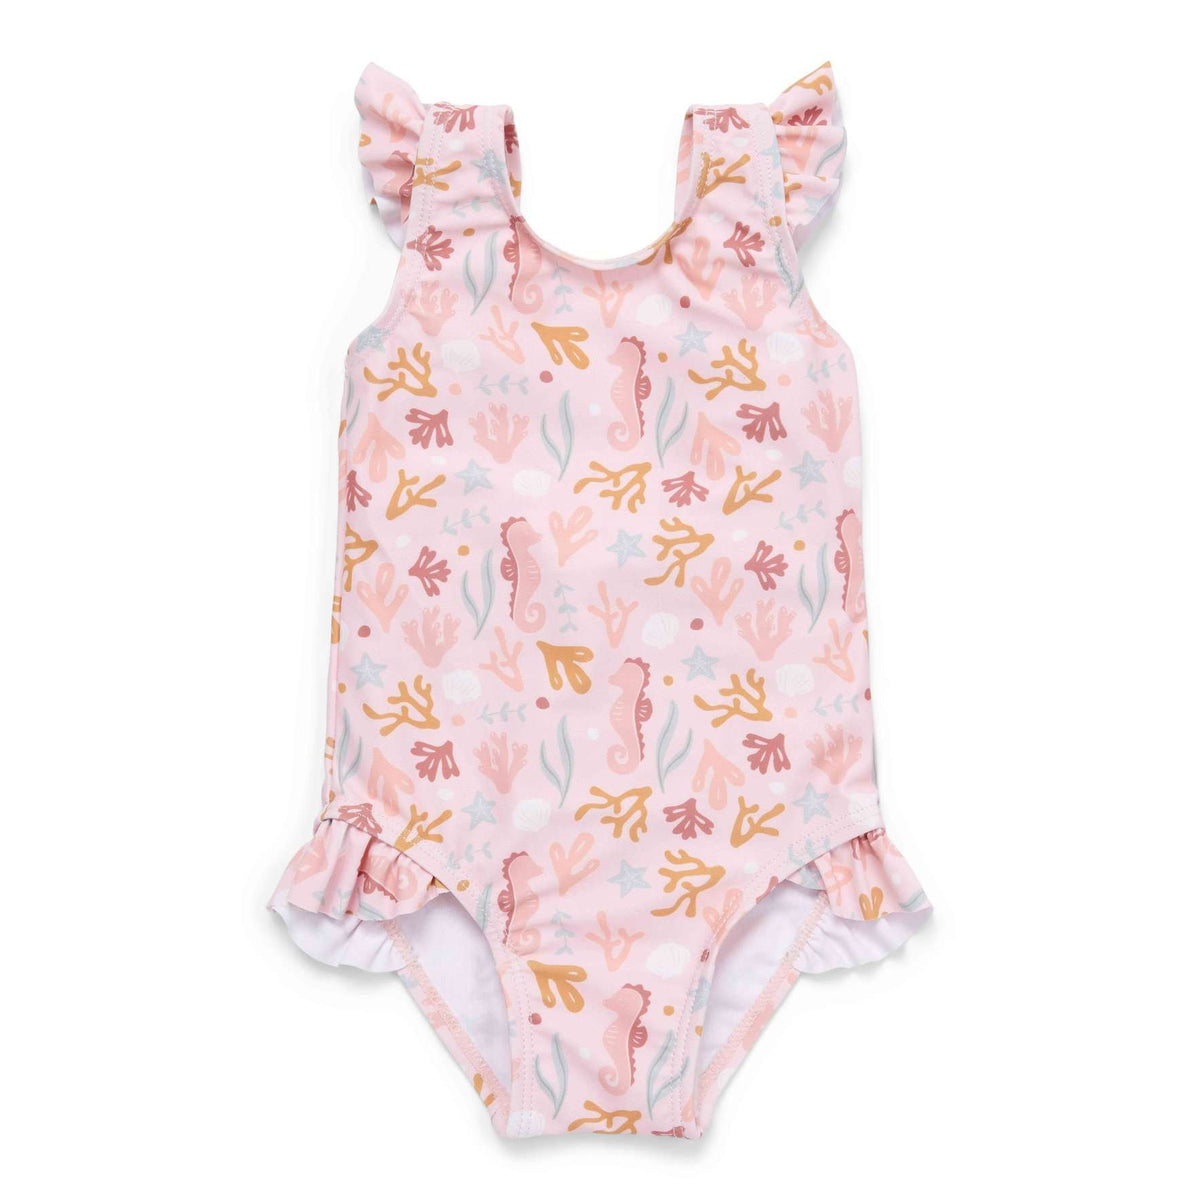 Bathsuit with ruffle Coral sea